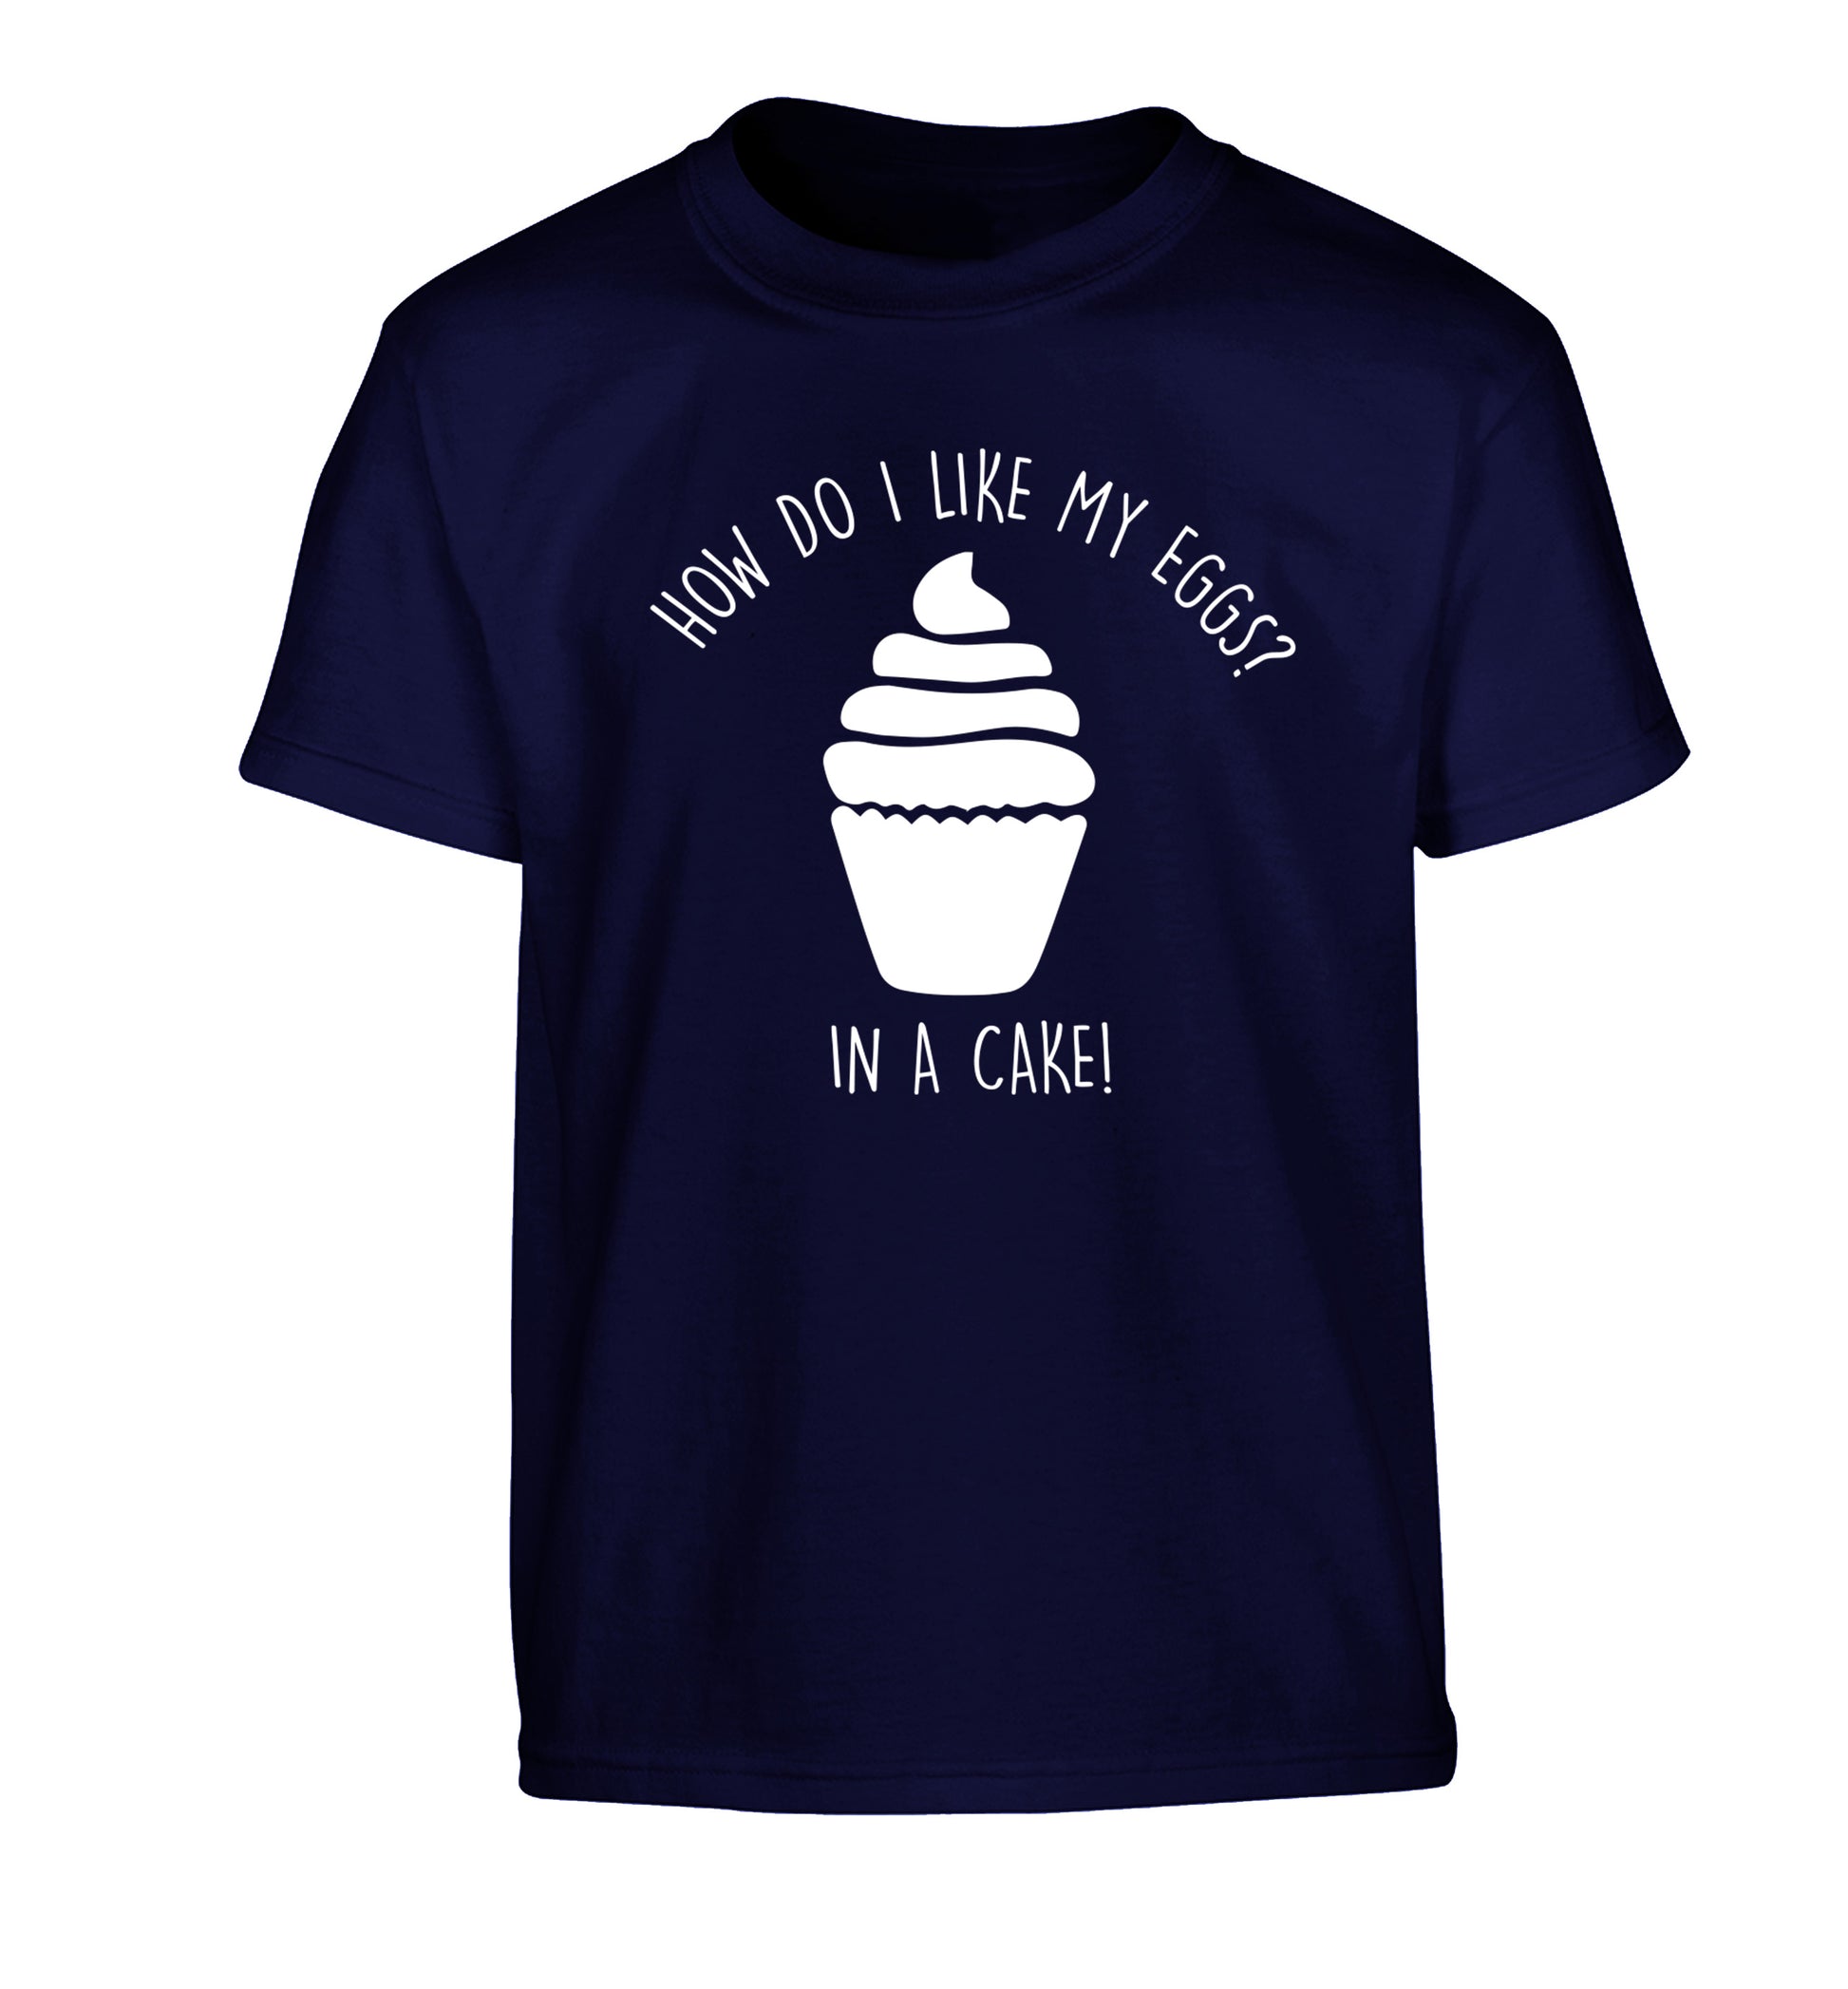 How do I like my eggs? In a cake! Children's navy Tshirt 12-14 Years